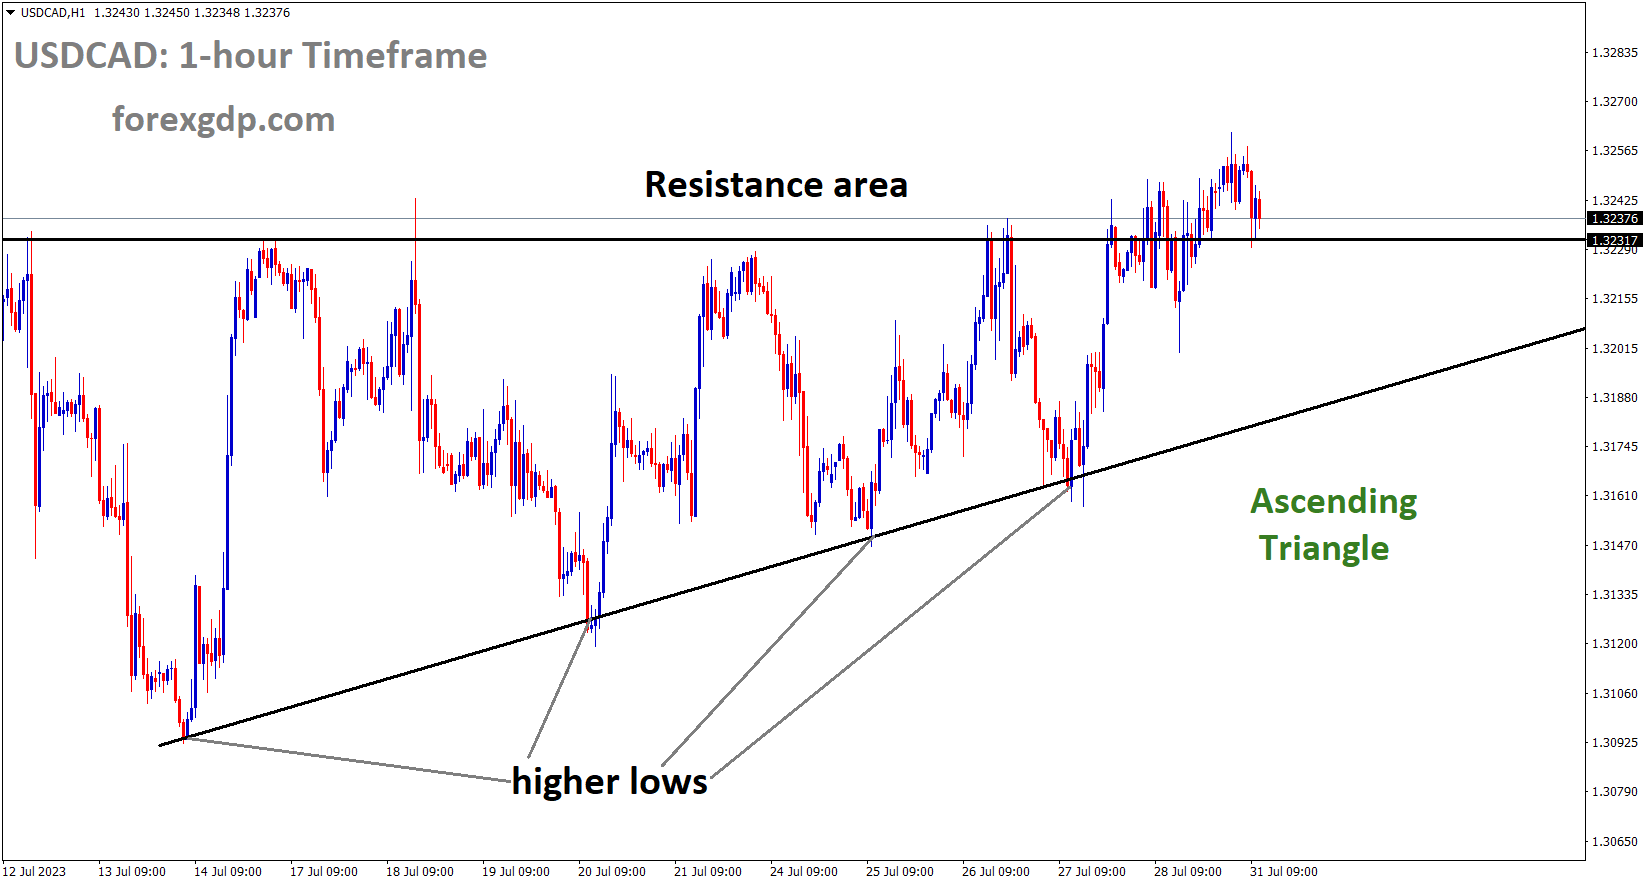 USDCAD is moving in an Ascending triangle pattern and the market has reached the resistance area of the pattern 1